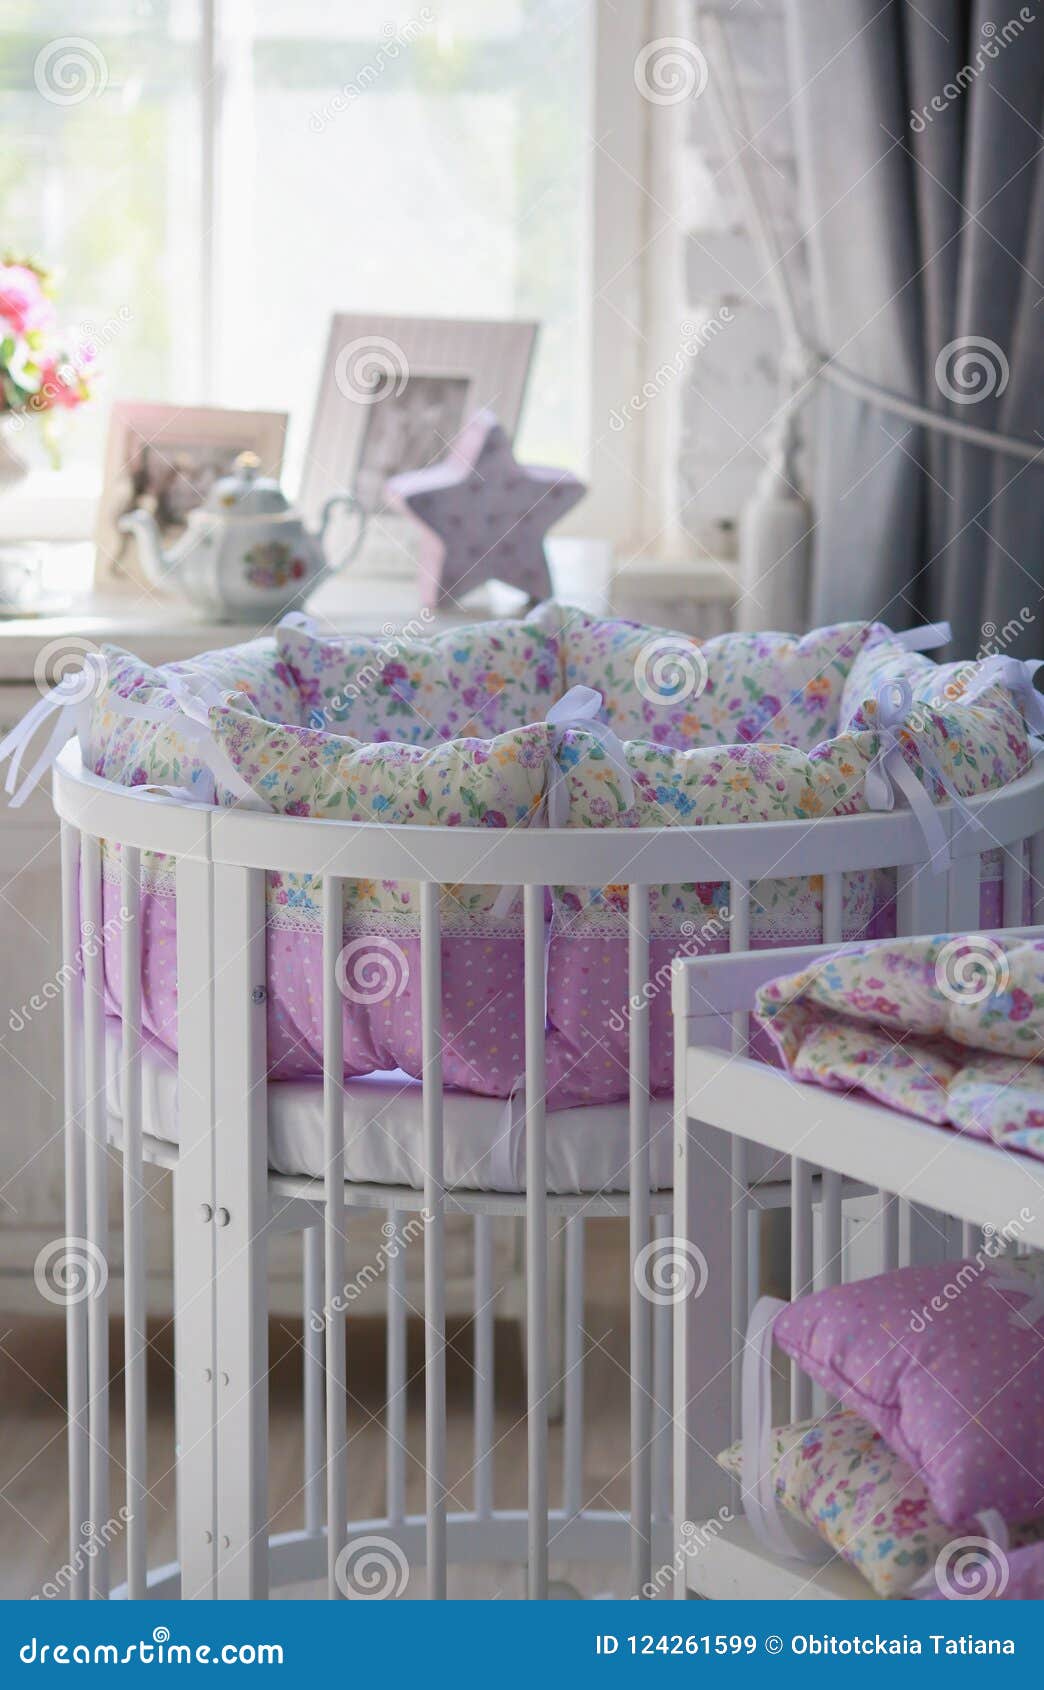 White Cribs For Babies Round Shape Stock Image Image Of Cribs